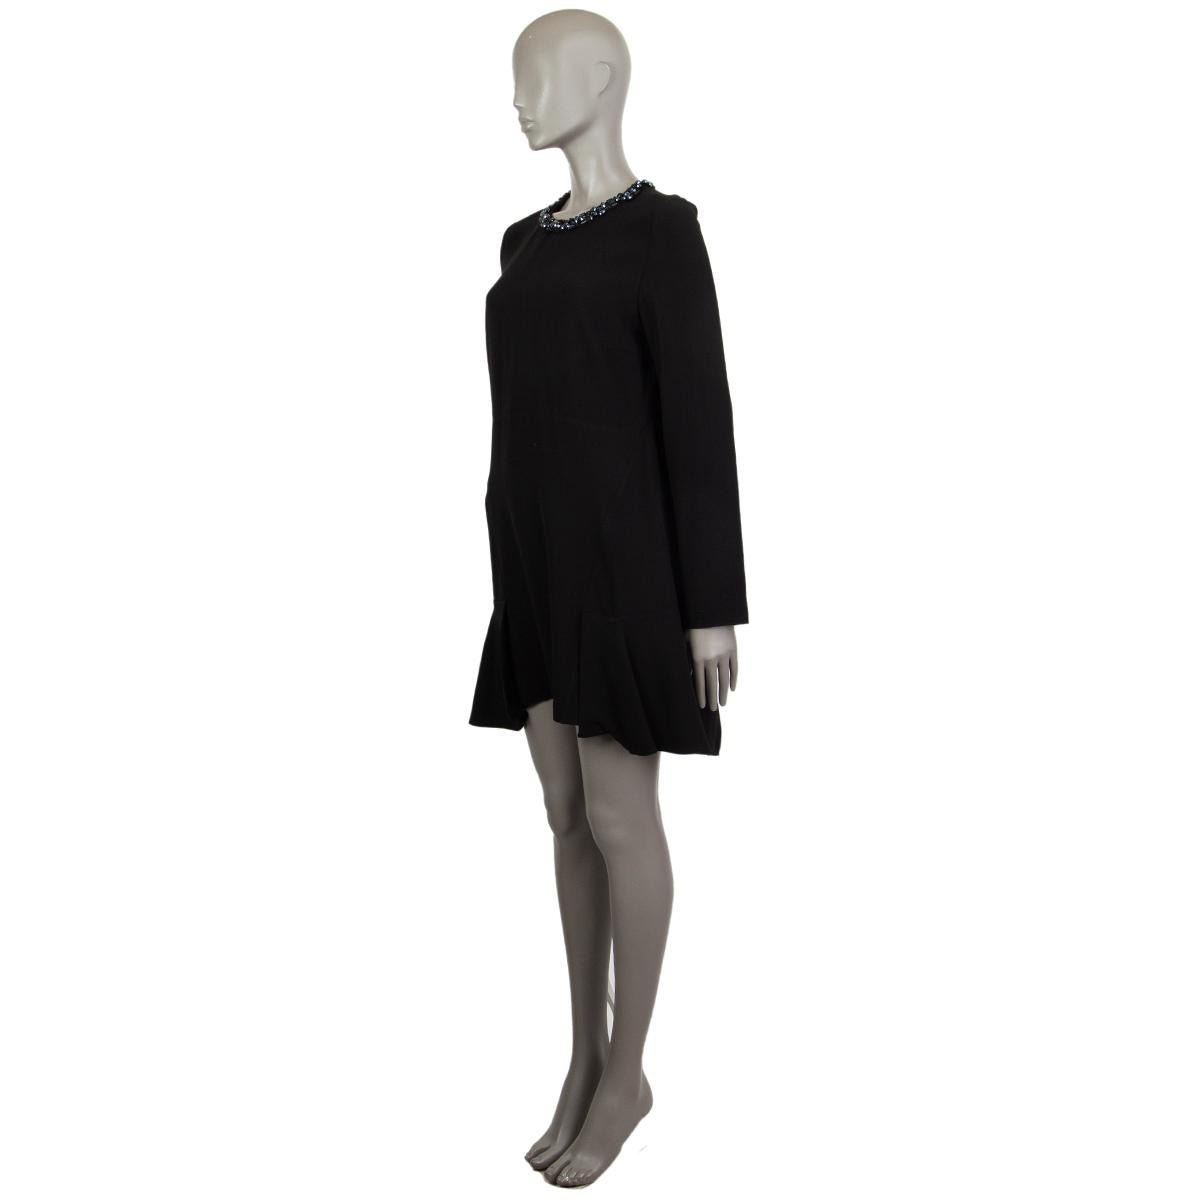 100% authentic Marni long-sleeve dress in black viscose (58%) and acetate (42%). With rhinestone embellishments around the neck and pleated hemline. Closes with invisible zipper on the back. Unlined. Has been worn and is in excellent